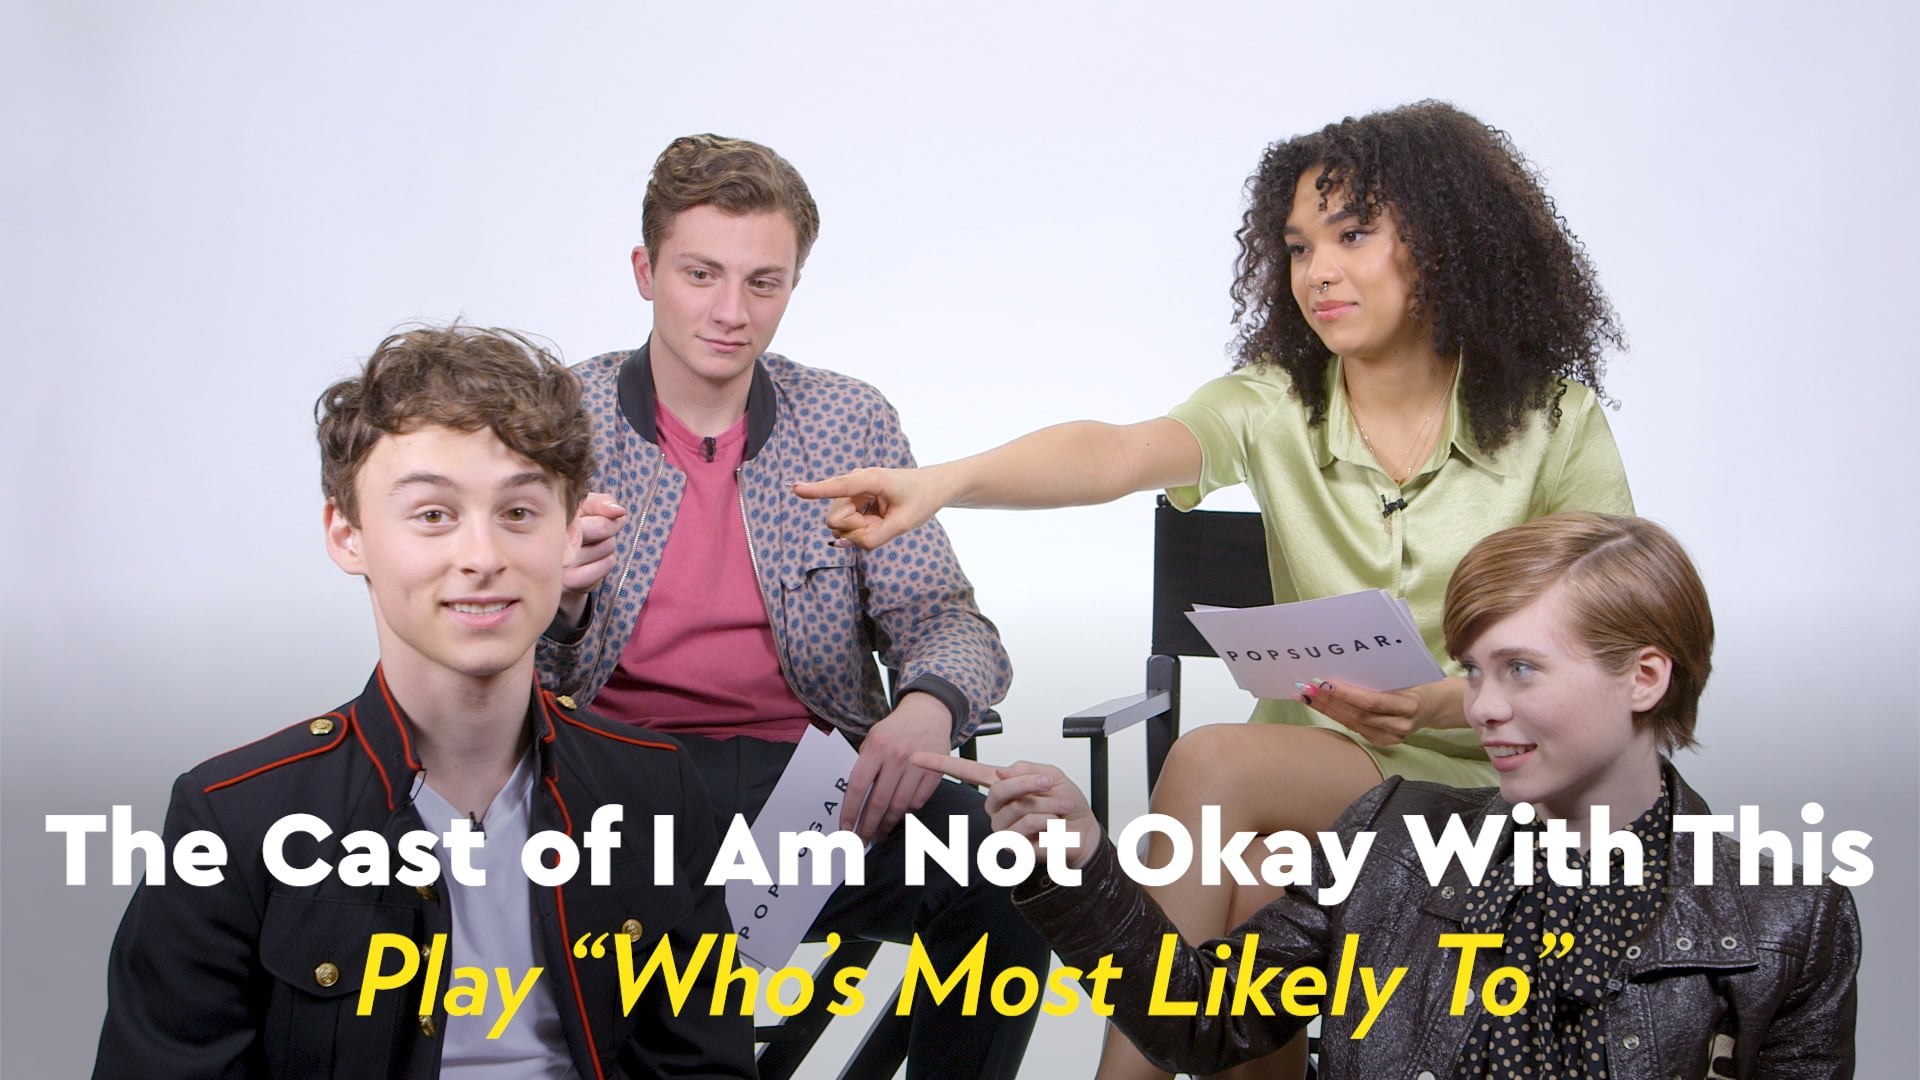 The Cast Of I Am Not Okay With This Played Who S Most Likely And Now We Re Even More Obsessed Video Dailymotion